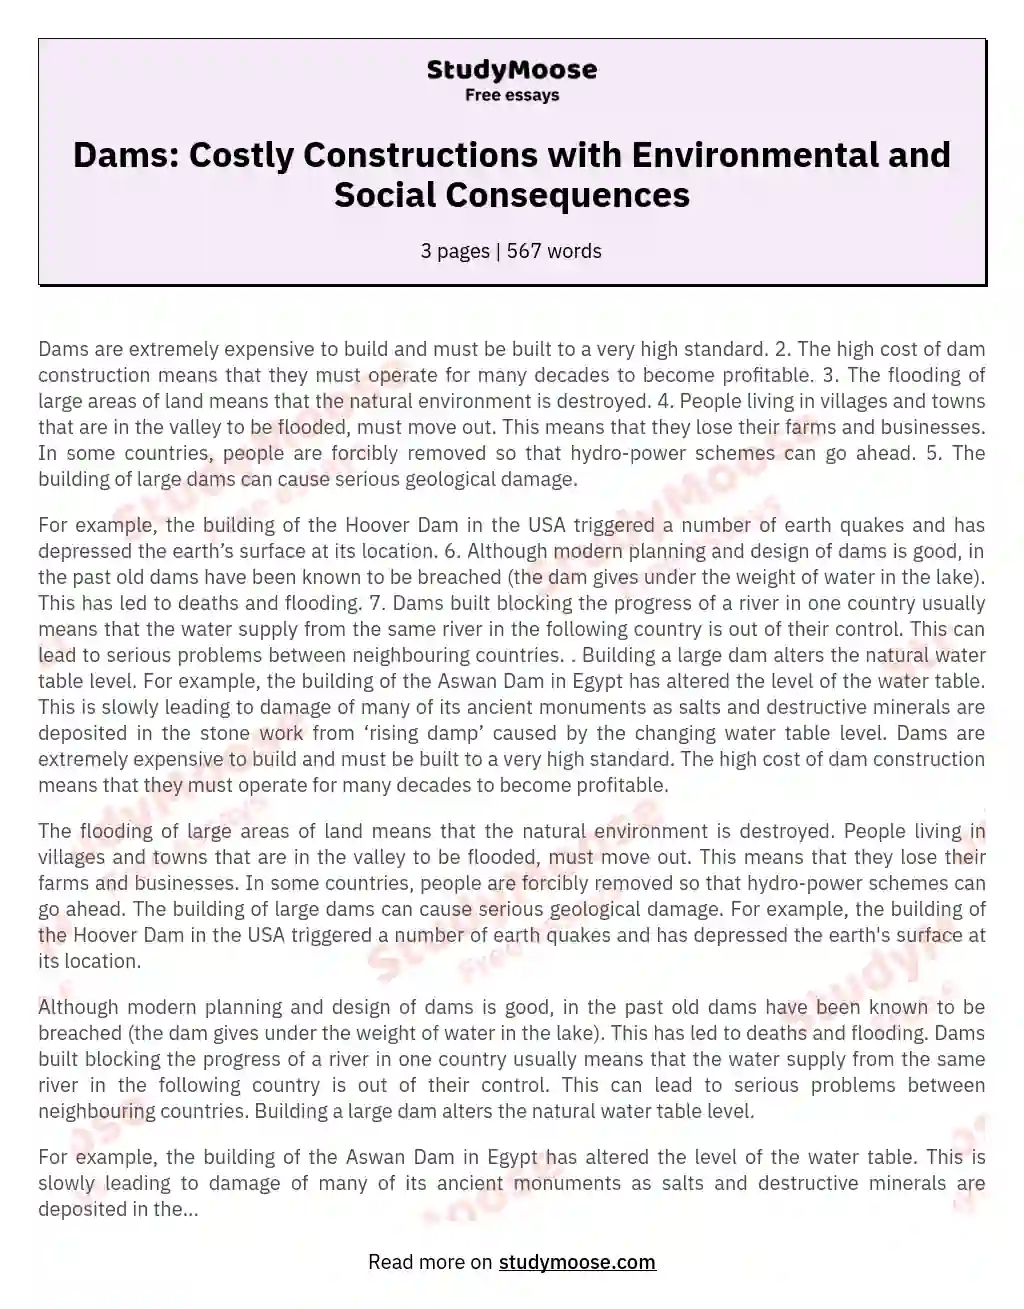 Dams: Costly Constructions with Environmental and Social Consequences essay